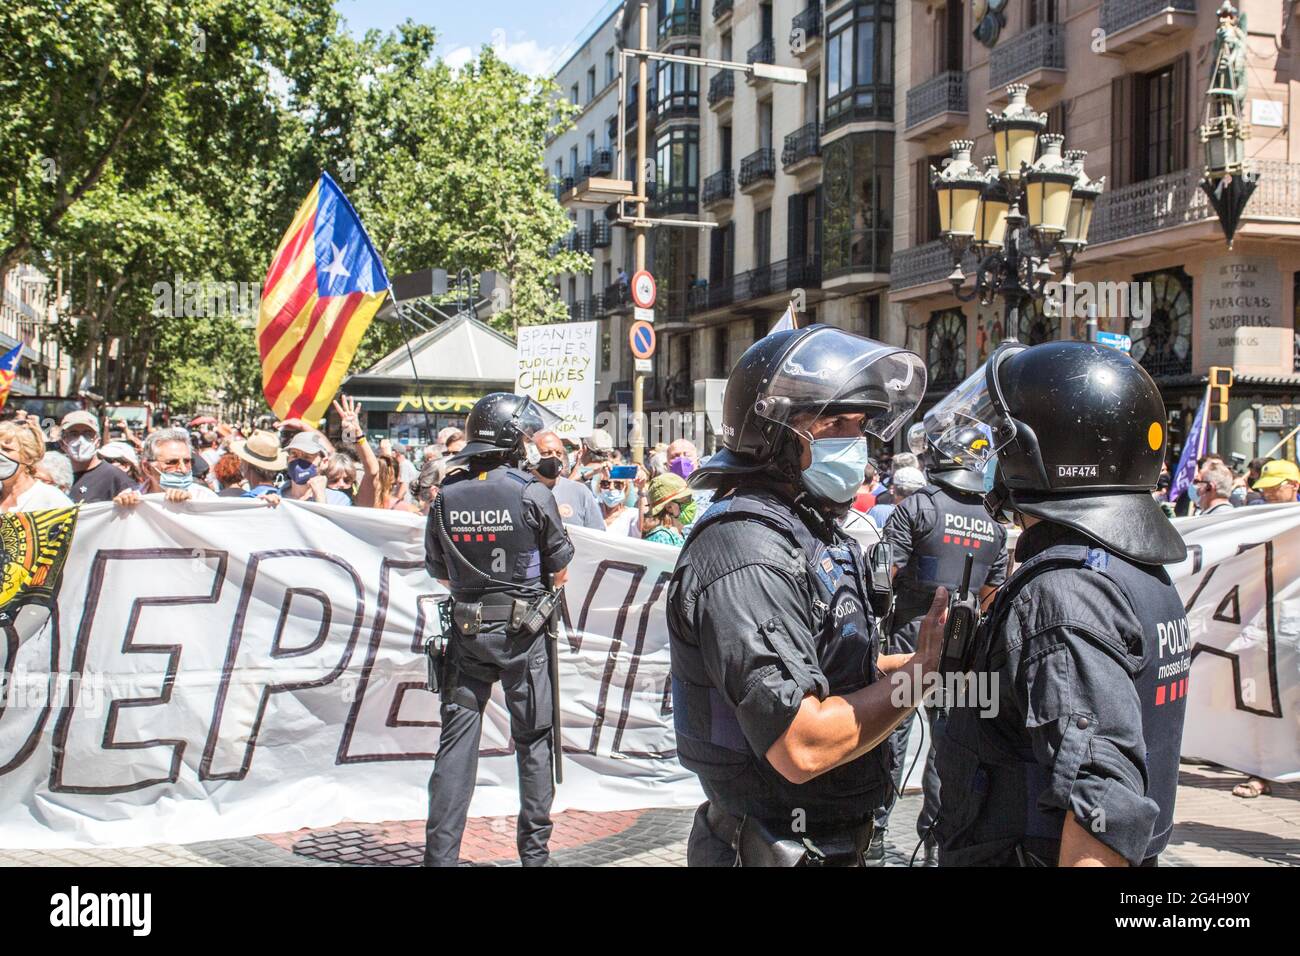 Police seen in front of protesters with Catalan independence flags and a banner saying 'Independence' during the demonstration.Hundreds of Catalan independentistas have demonstrated in Las Ramblas in Barcelona, in front of the Gran Teatre del Liceu (Great Theater of the Lyceum), shielded by many policemen, to protest the visit of the President of the Spanish Government, Pedro Sanchez, who has held a conference entitled 'Reunion: a project for the future for all of Spain', with the expectation of an imminent granting of pardons for the independence leaders in prison. The protesters protested to Stock Photo